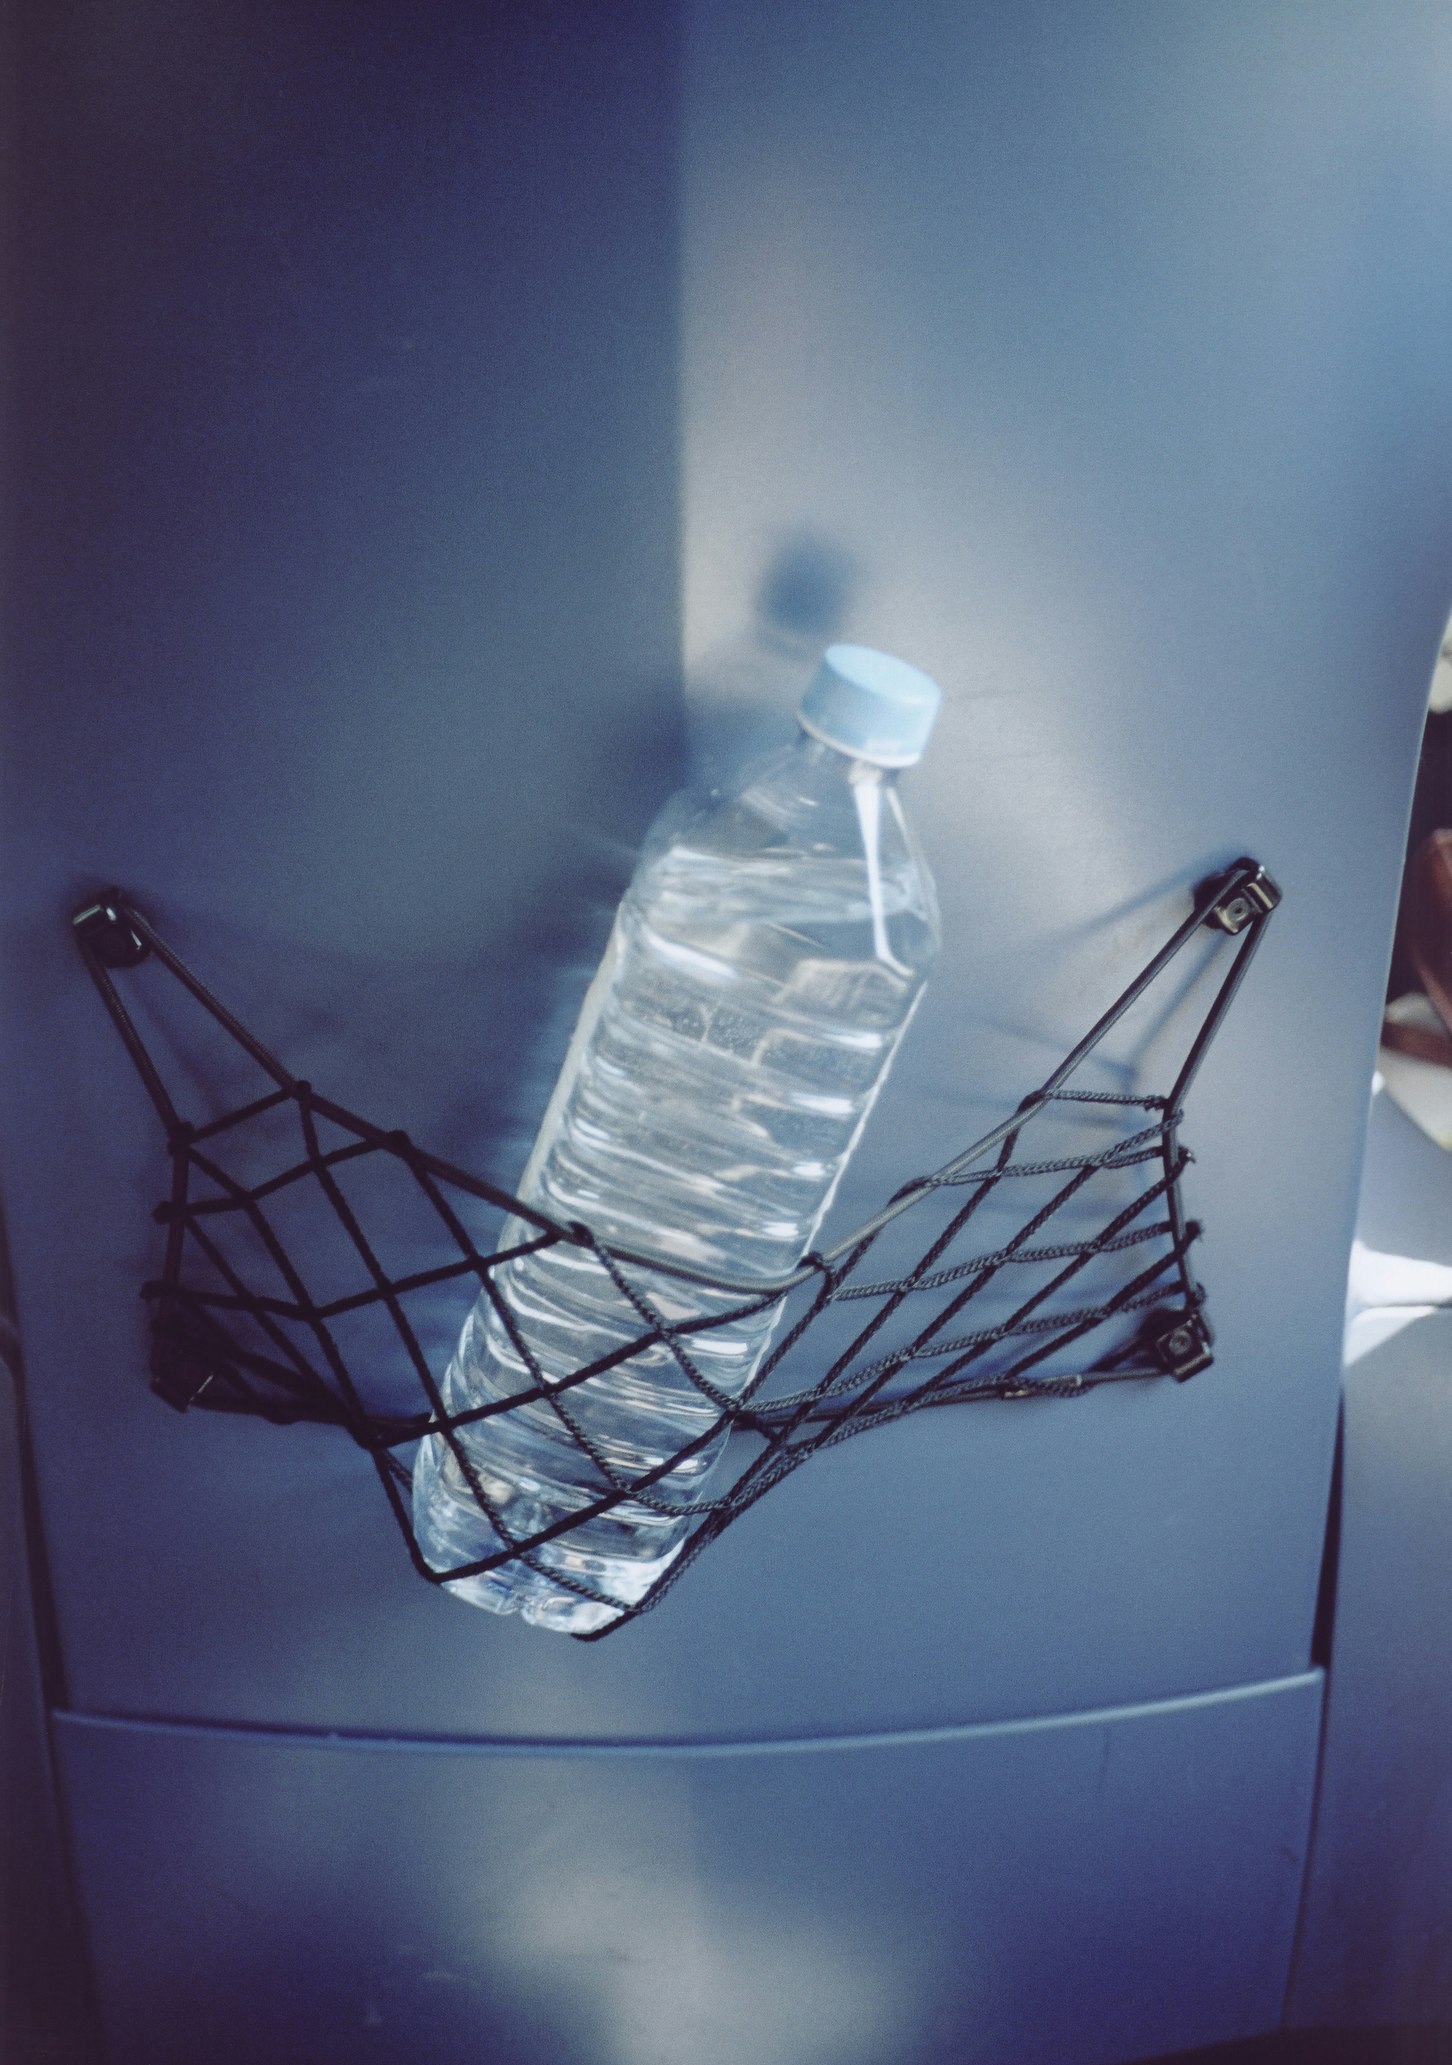 An unbranded clear plastic bottle sits in the netting on the back of a plane seat. It's full of water. Keeping hydrated can reduce jet lag.